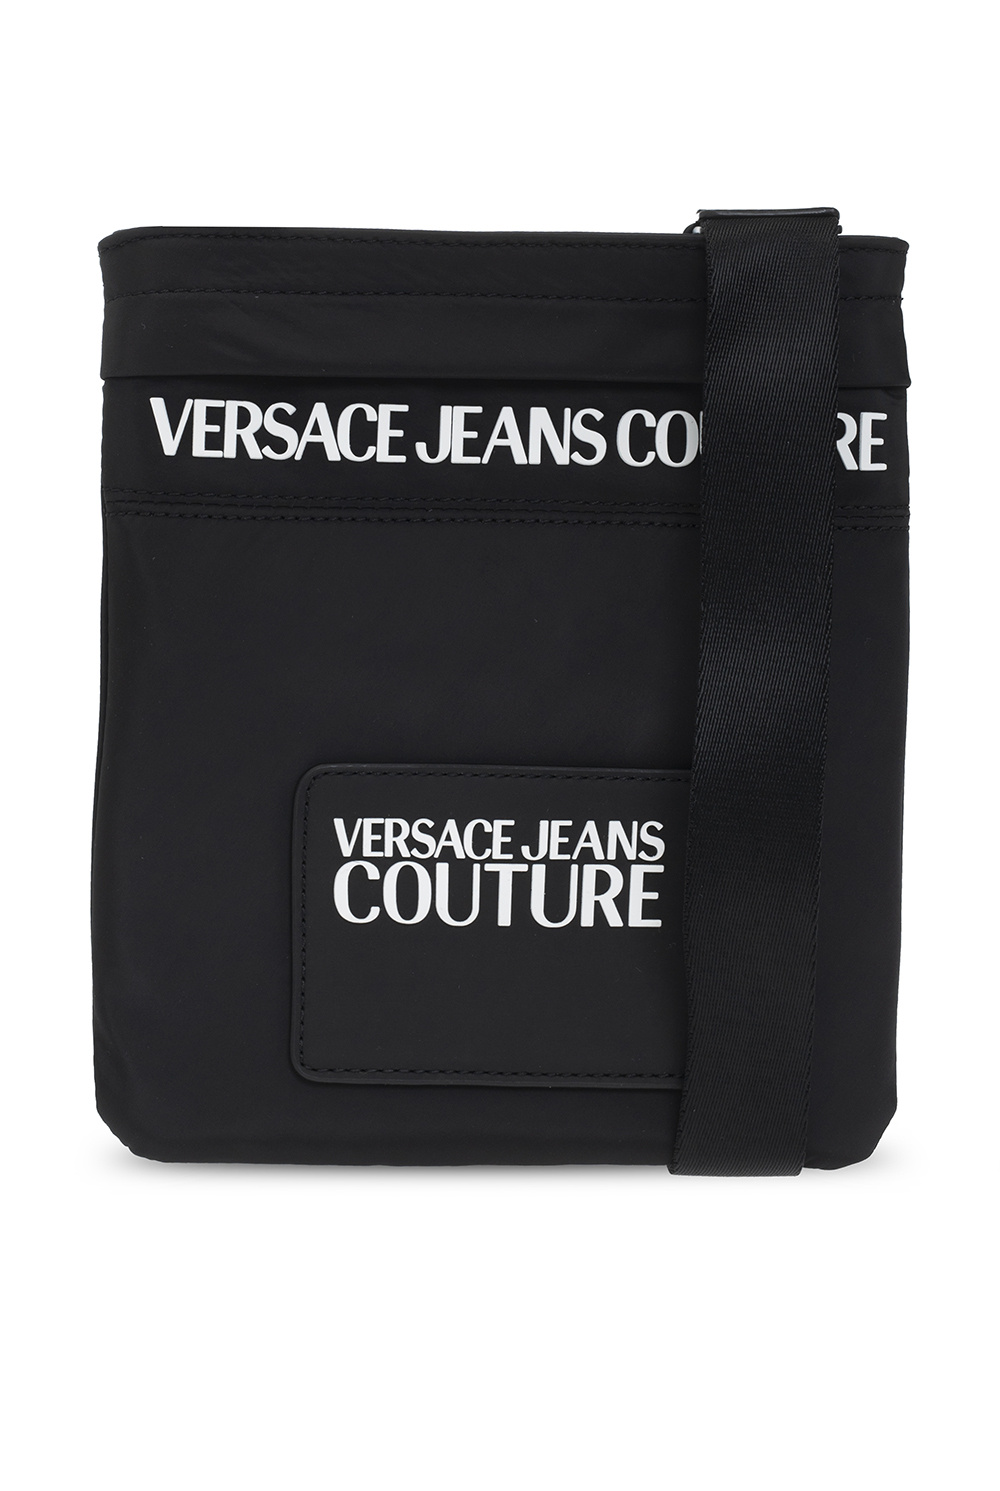 Versace Jeans Couture kids brown print dress